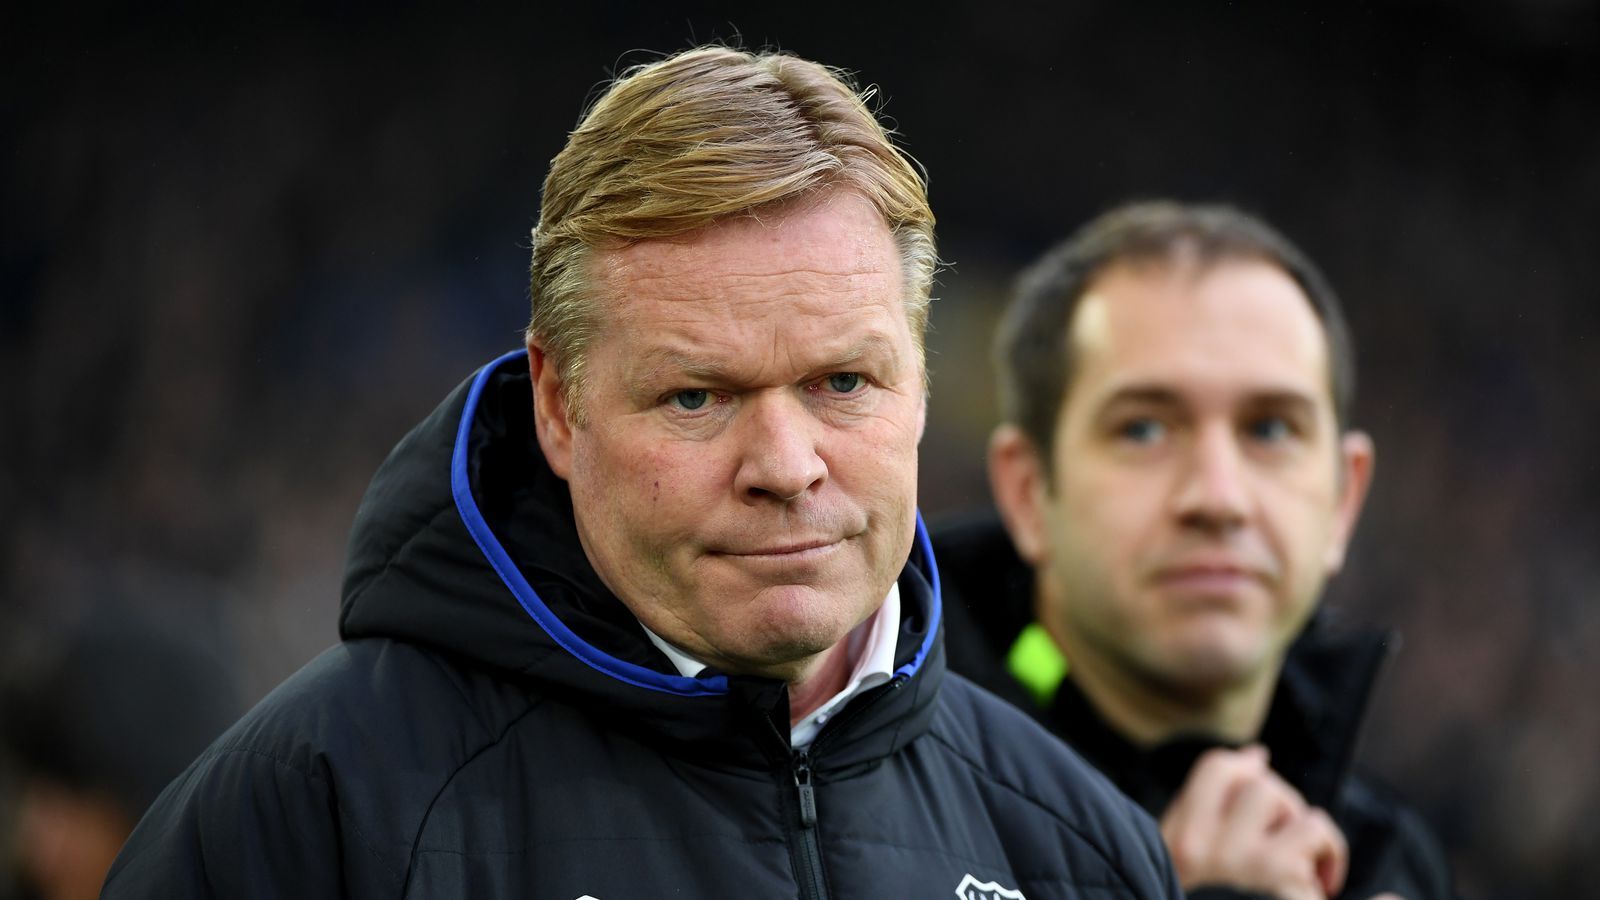 Koeman Remains Loyal to Coaching the National Team of Netherlands despite Links to Barcelona